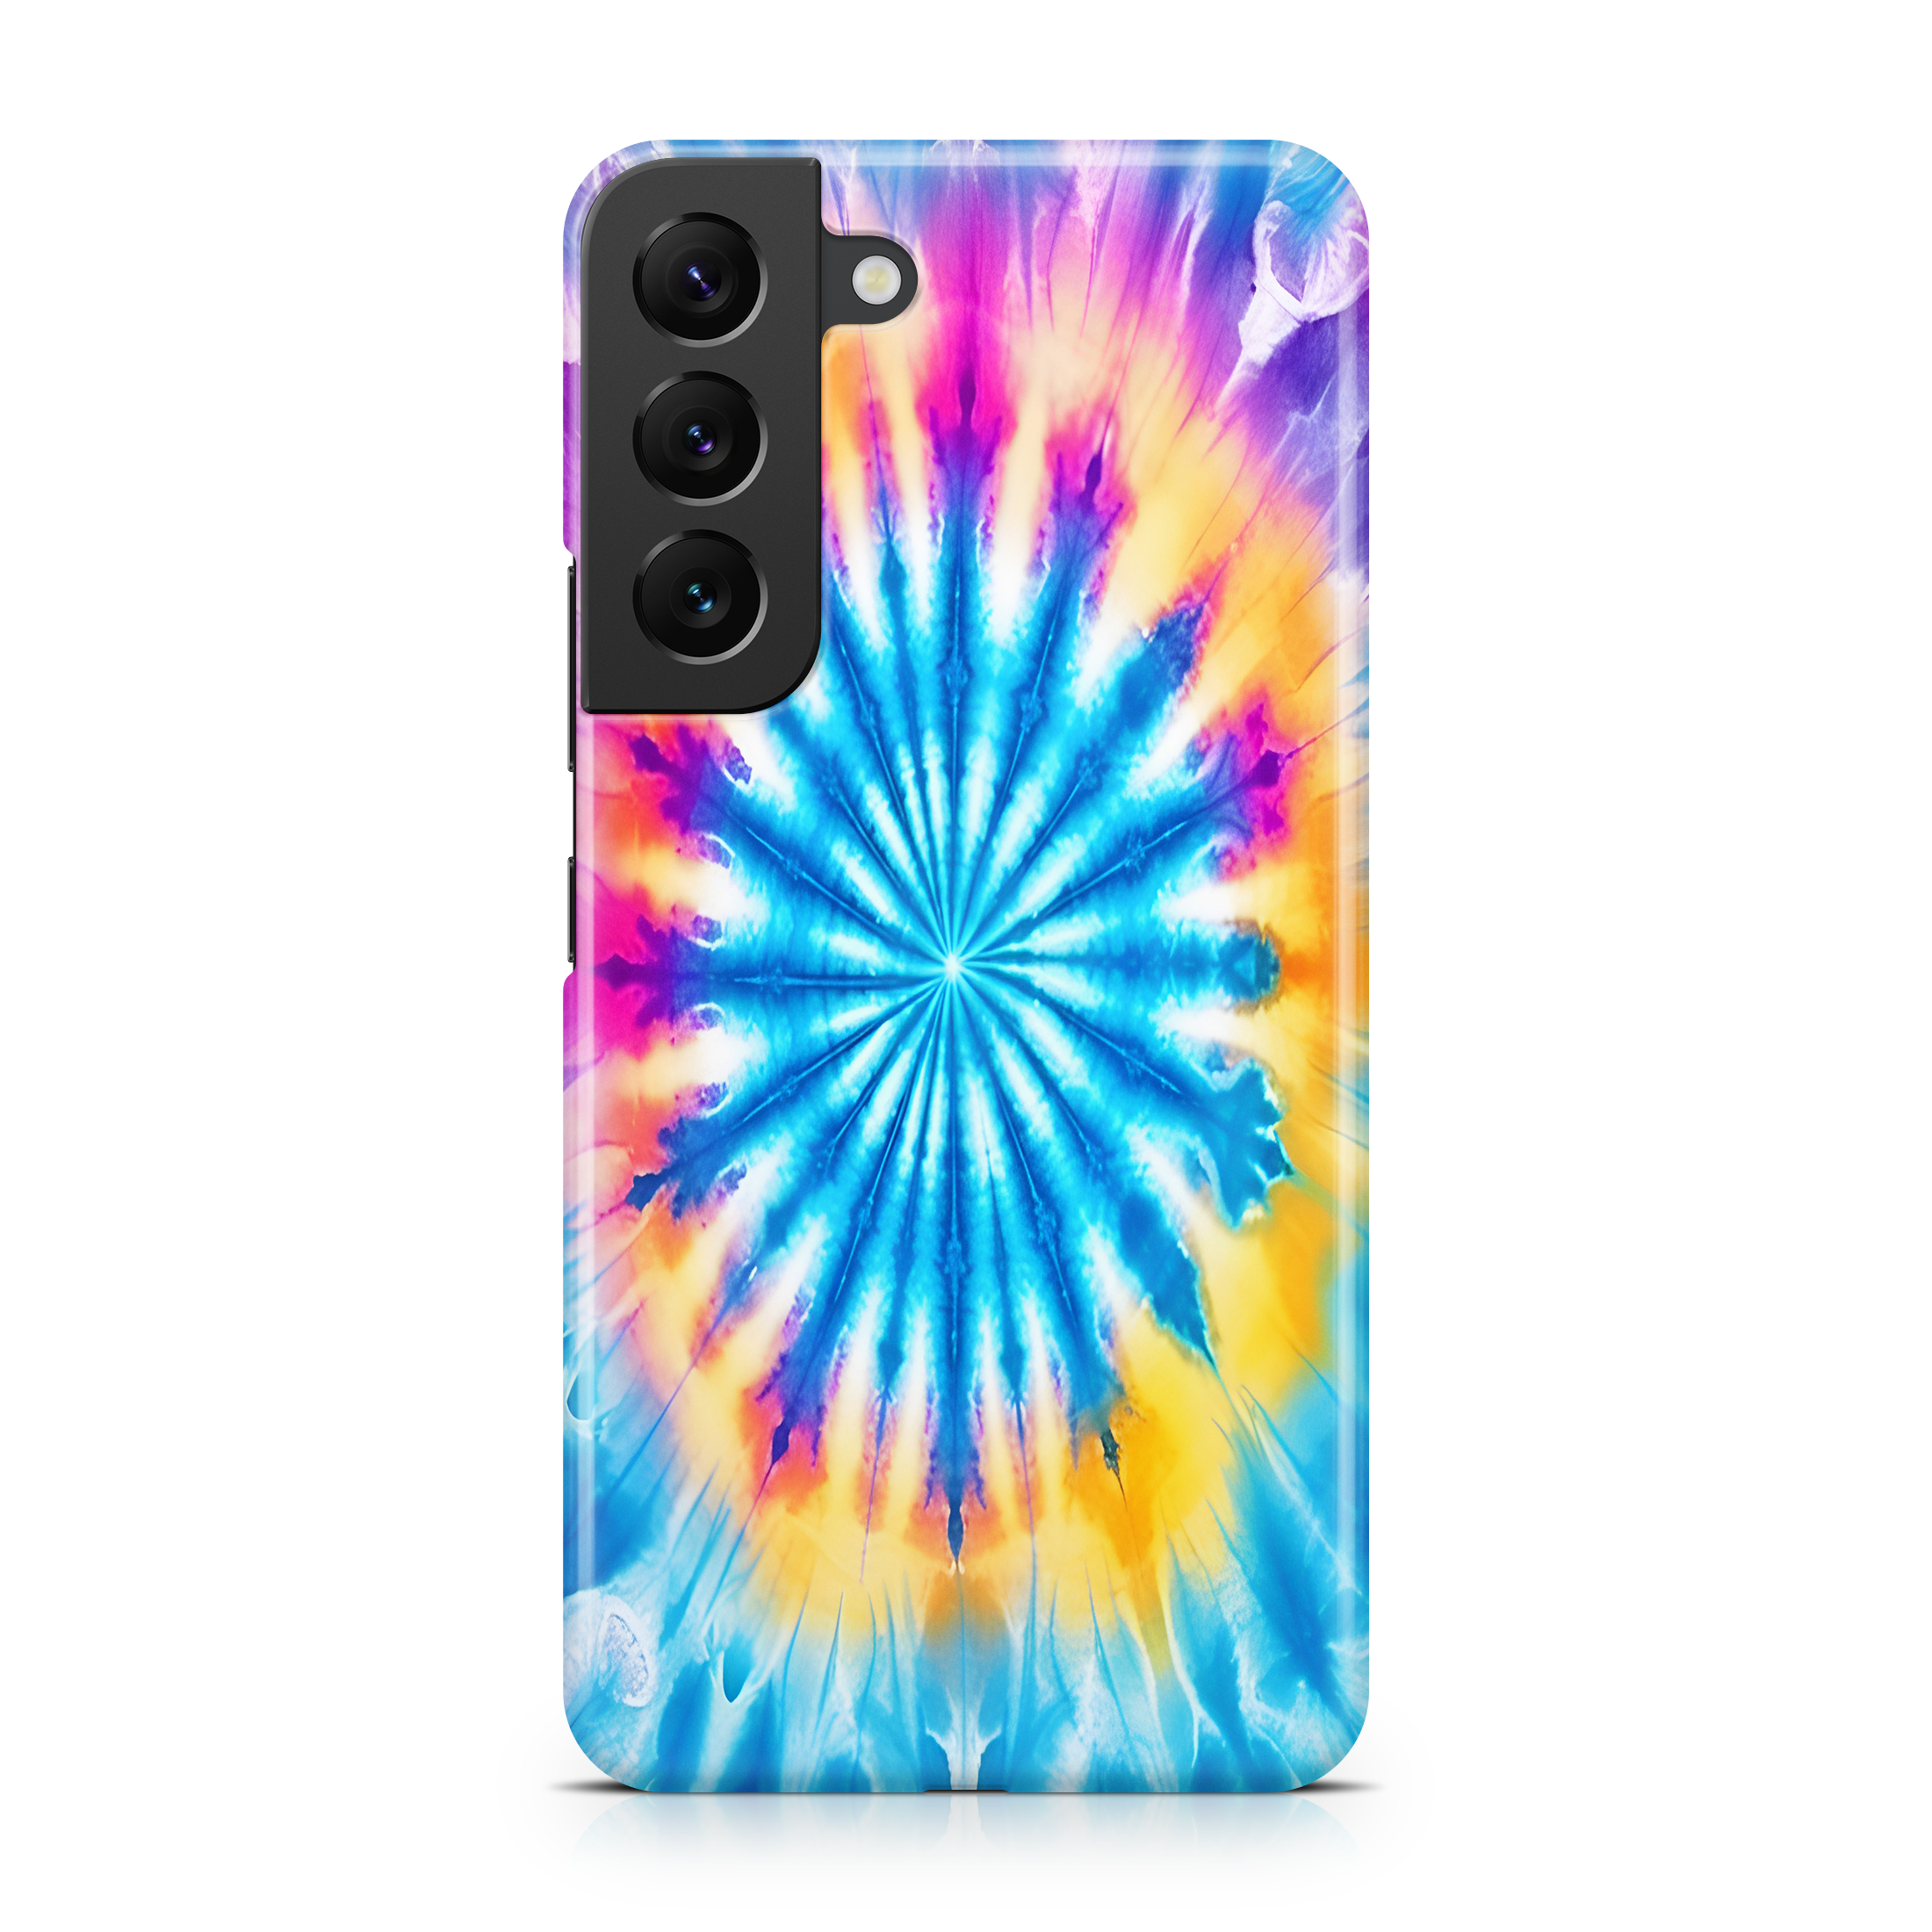 Hippie Tide - Samsung phone case designs by CaseSwagger